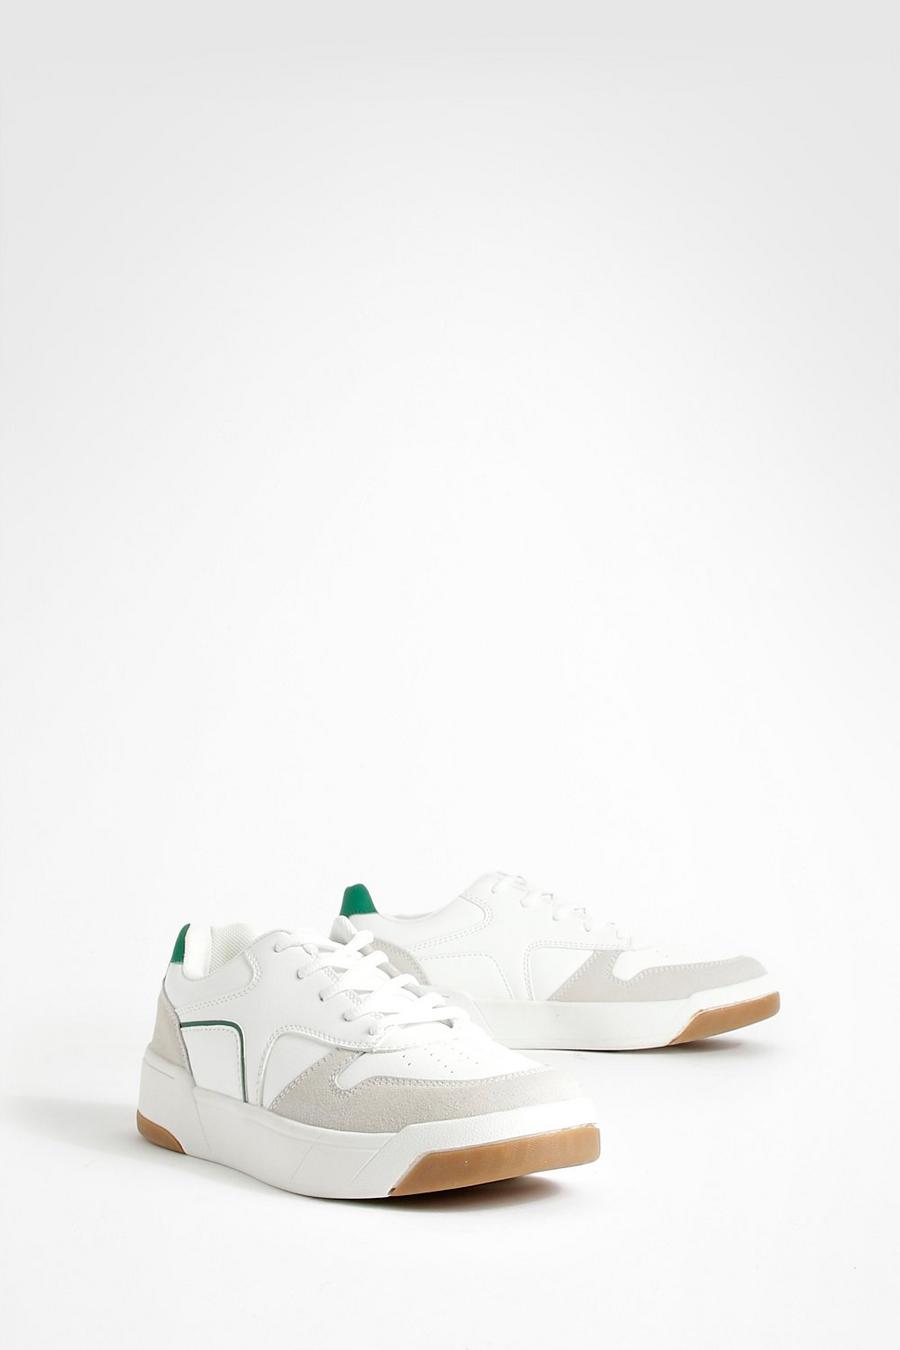 White Contrast Gum Sole Tennis Sneakers